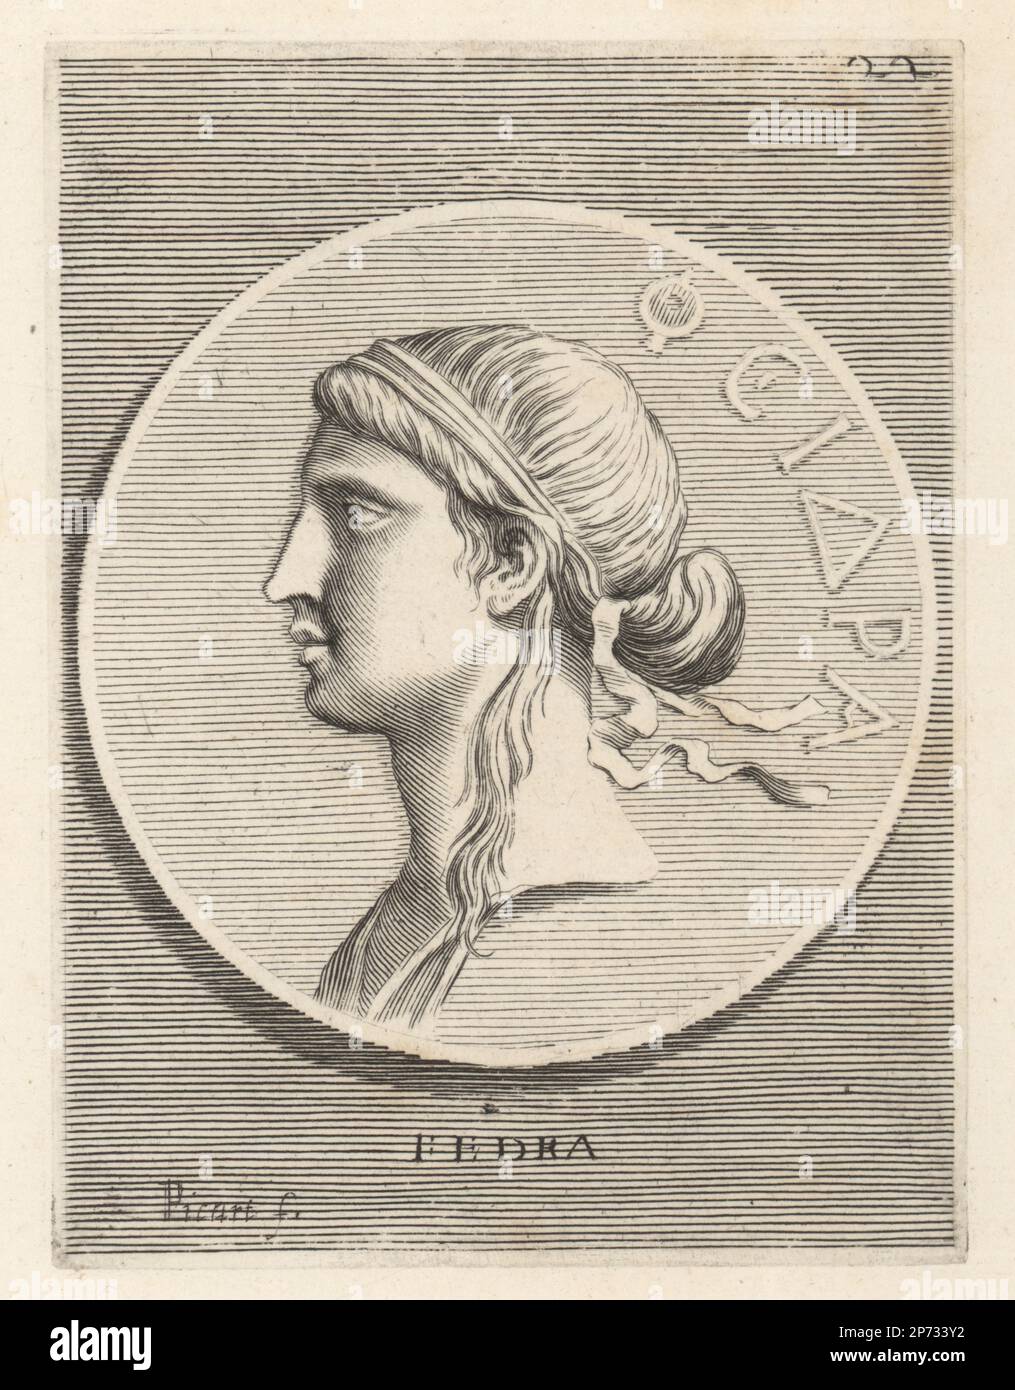 Phaedra, Cretan princess, daughter of Minos and Pasiphae, sister of Ariadne, and wife of Theseus, king of Athens. Head of a woman with her hair tied up in a simple band. Fedra. Copperplate engraving by Etienne Picart after Giovanni Angelo Canini from Iconografia, cioe disegni d'imagini de famosissimi monarchi, regi, filososi, poeti ed oratori dell' Antichita, Drawings of images of famous monarchs, kings, philosophers, poets and orators of Antiquity, Ignatio de’Lazari, Rome, 1699. Stock Photo